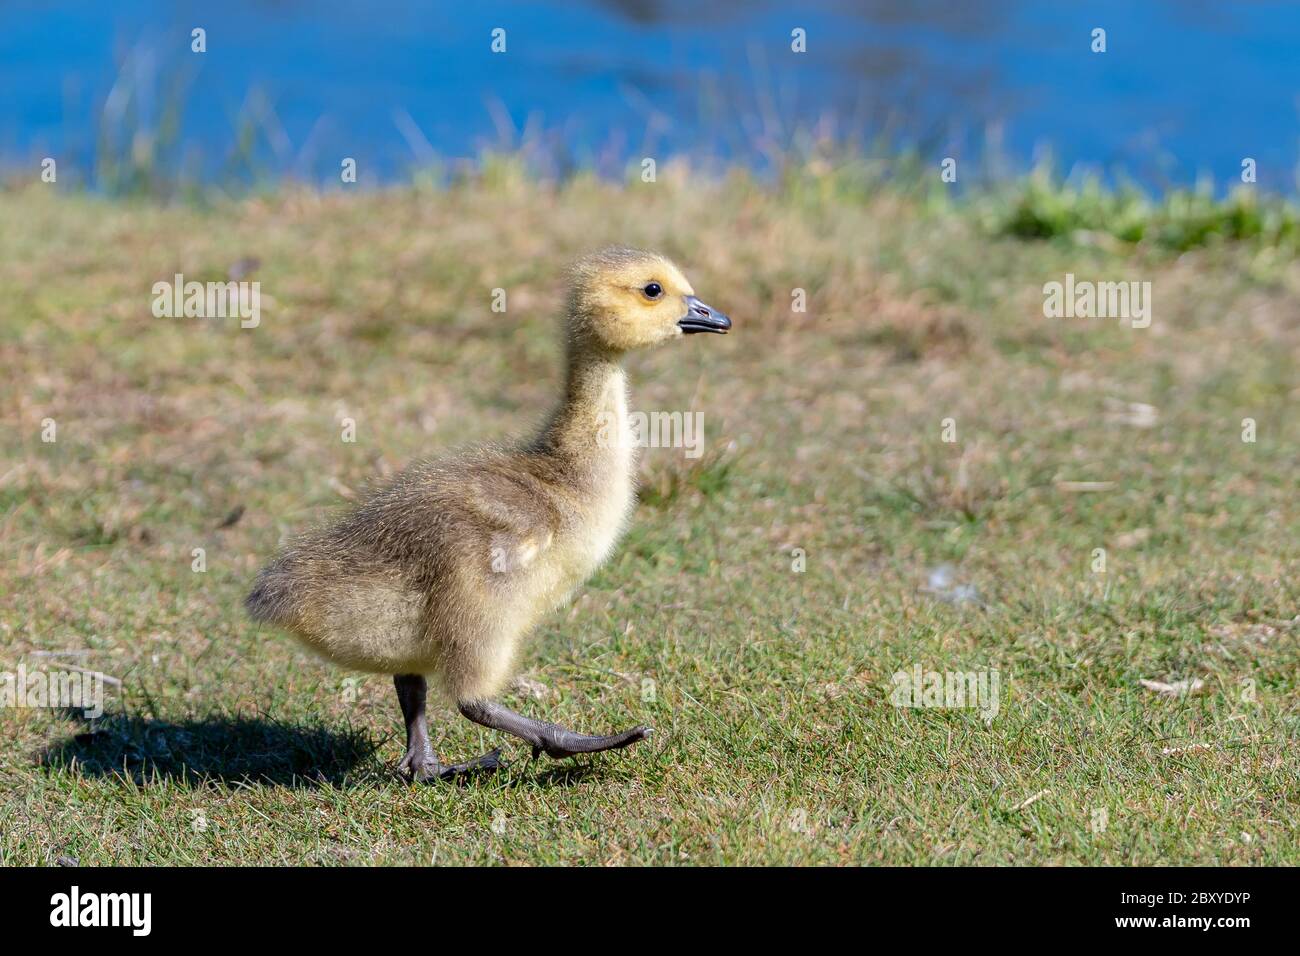 Baby Canada goose walking in short grass. He is looking ahead, one foot raised. Blue water in the background. Stock Photo